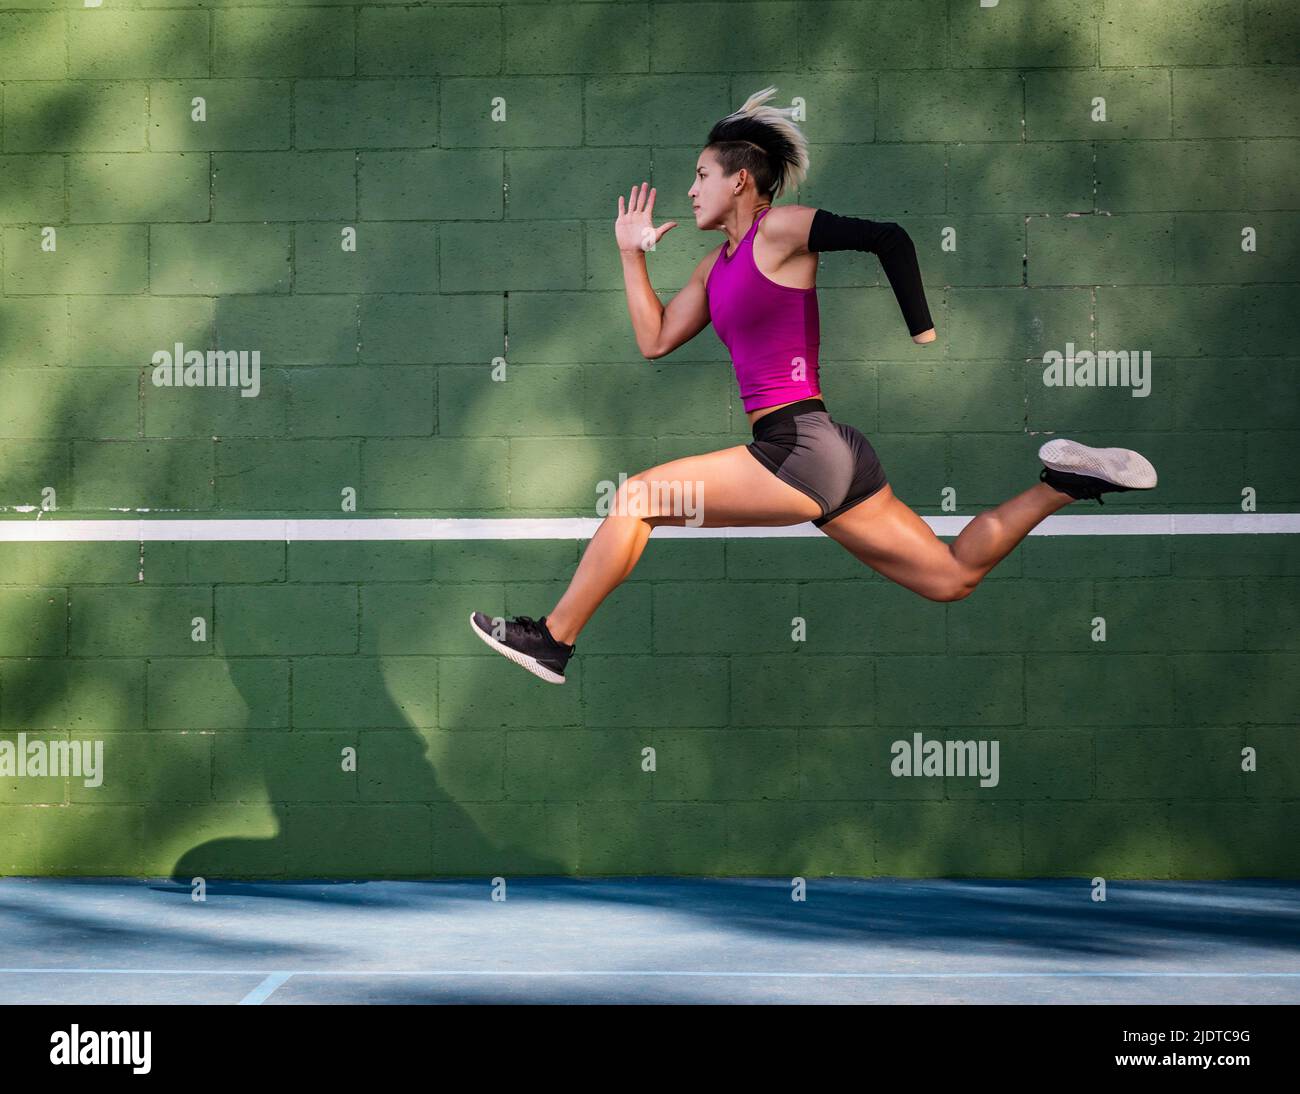 Athletic woman with prosthetic arm running against wall Stock Photo